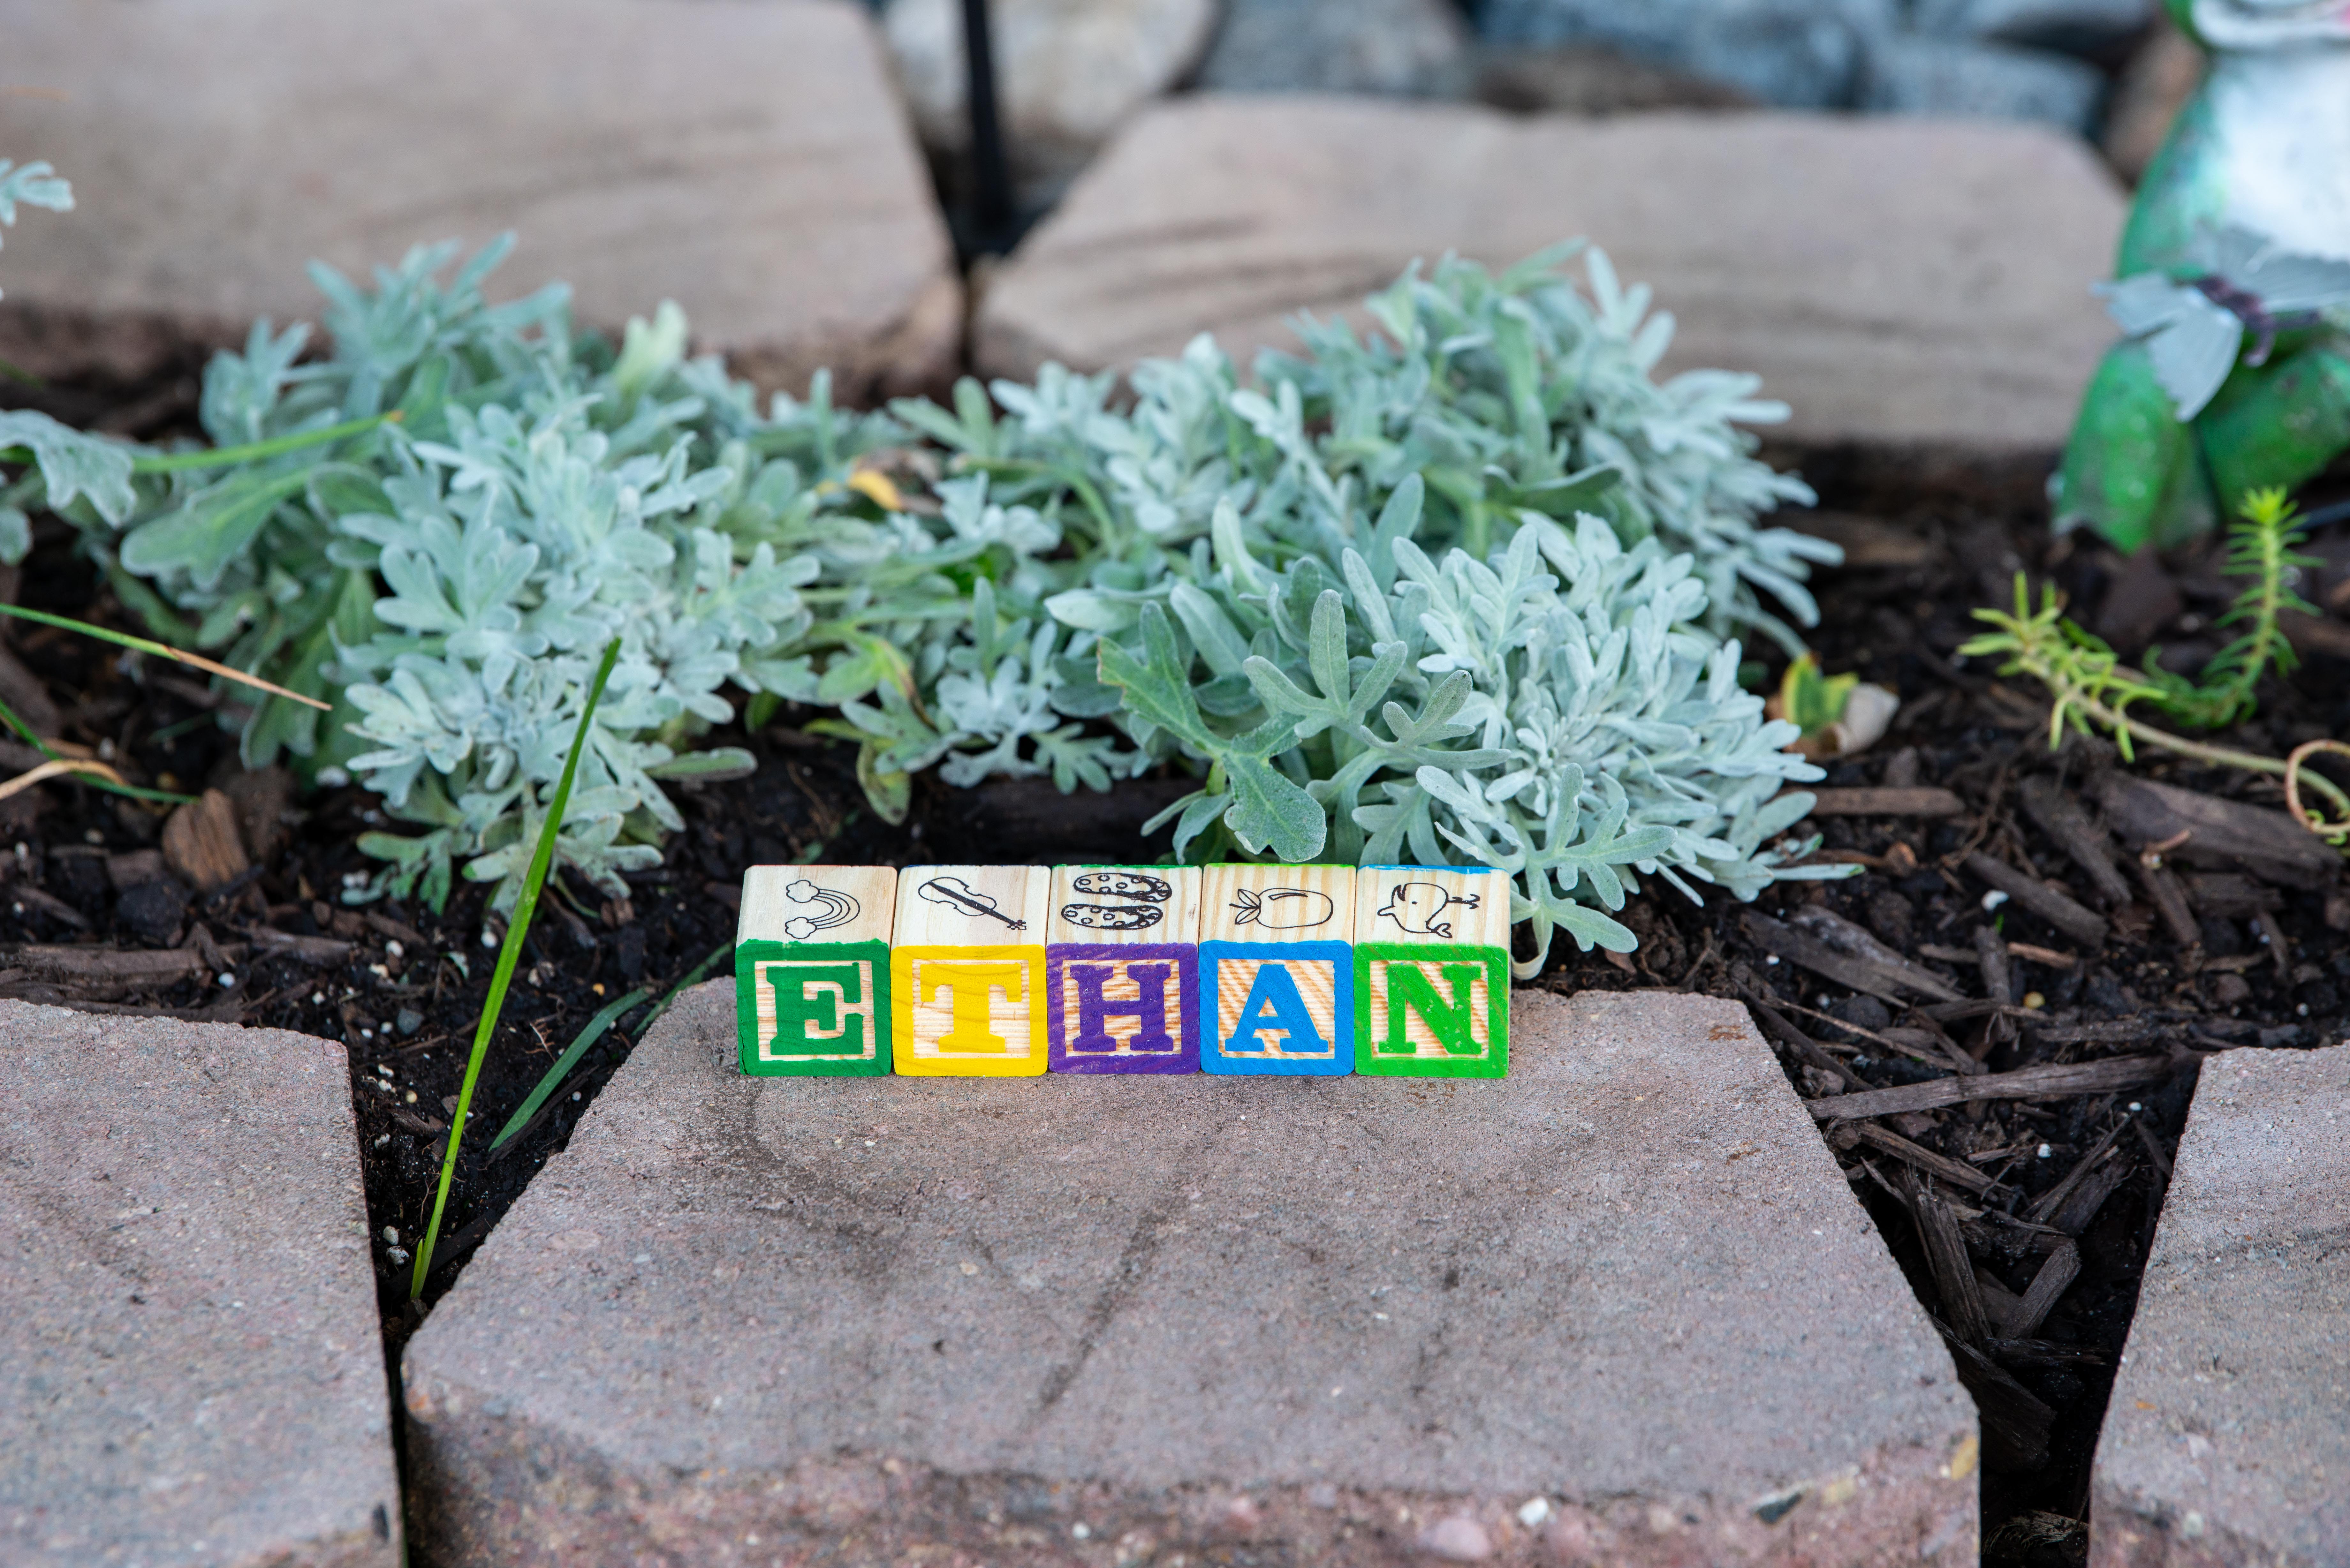 Remembering Ethan… (And happy 71st birthday mommy)